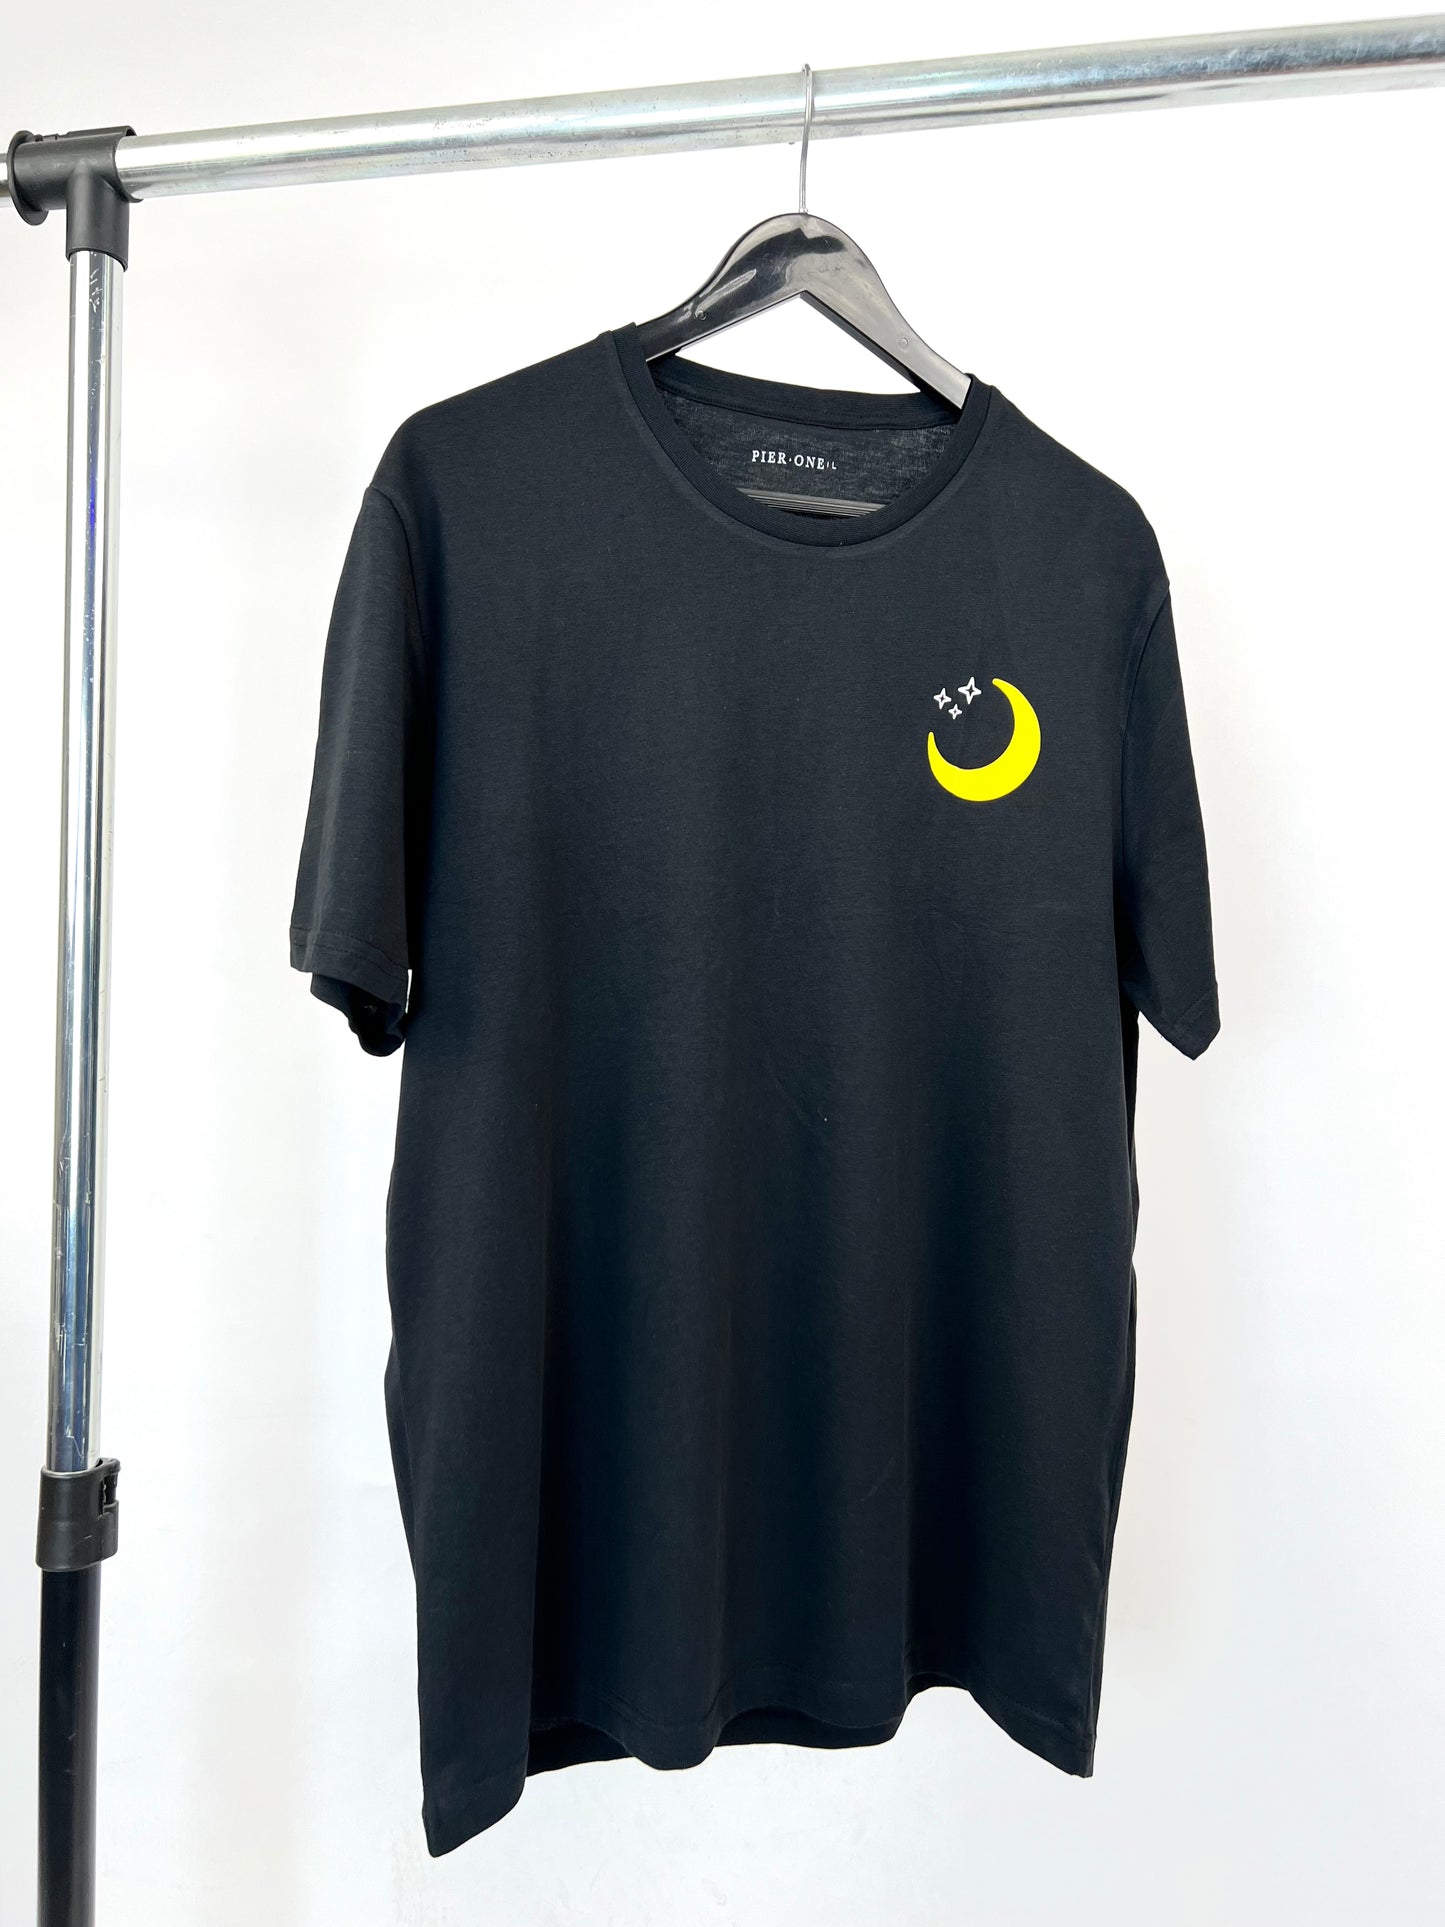 Pier One Crescent T-shirt in black